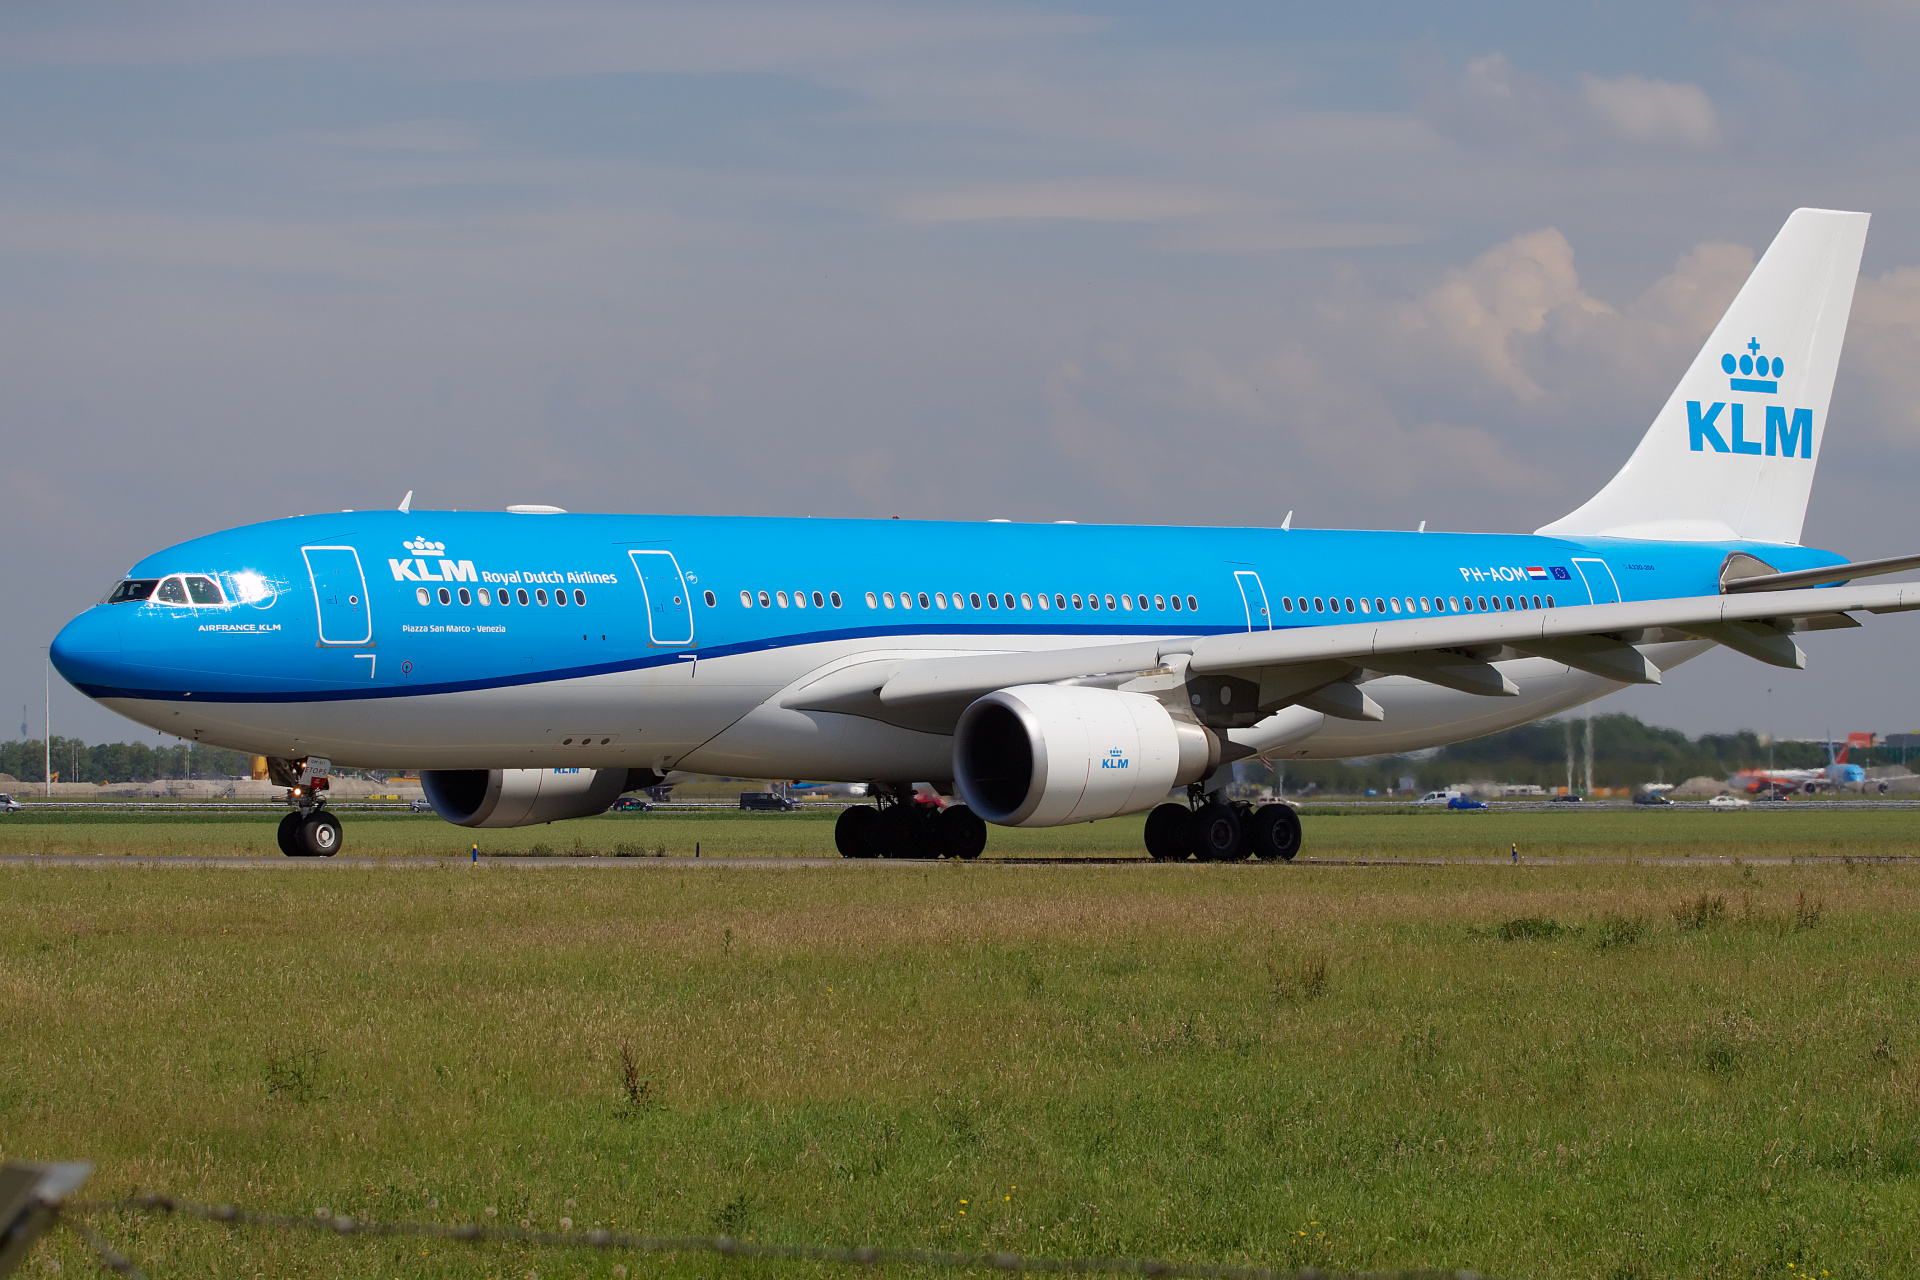 PH-AOM (Aircraft » Schiphol Spotting » Airbus A330-200 » KLM Royal Dutch Airlines)